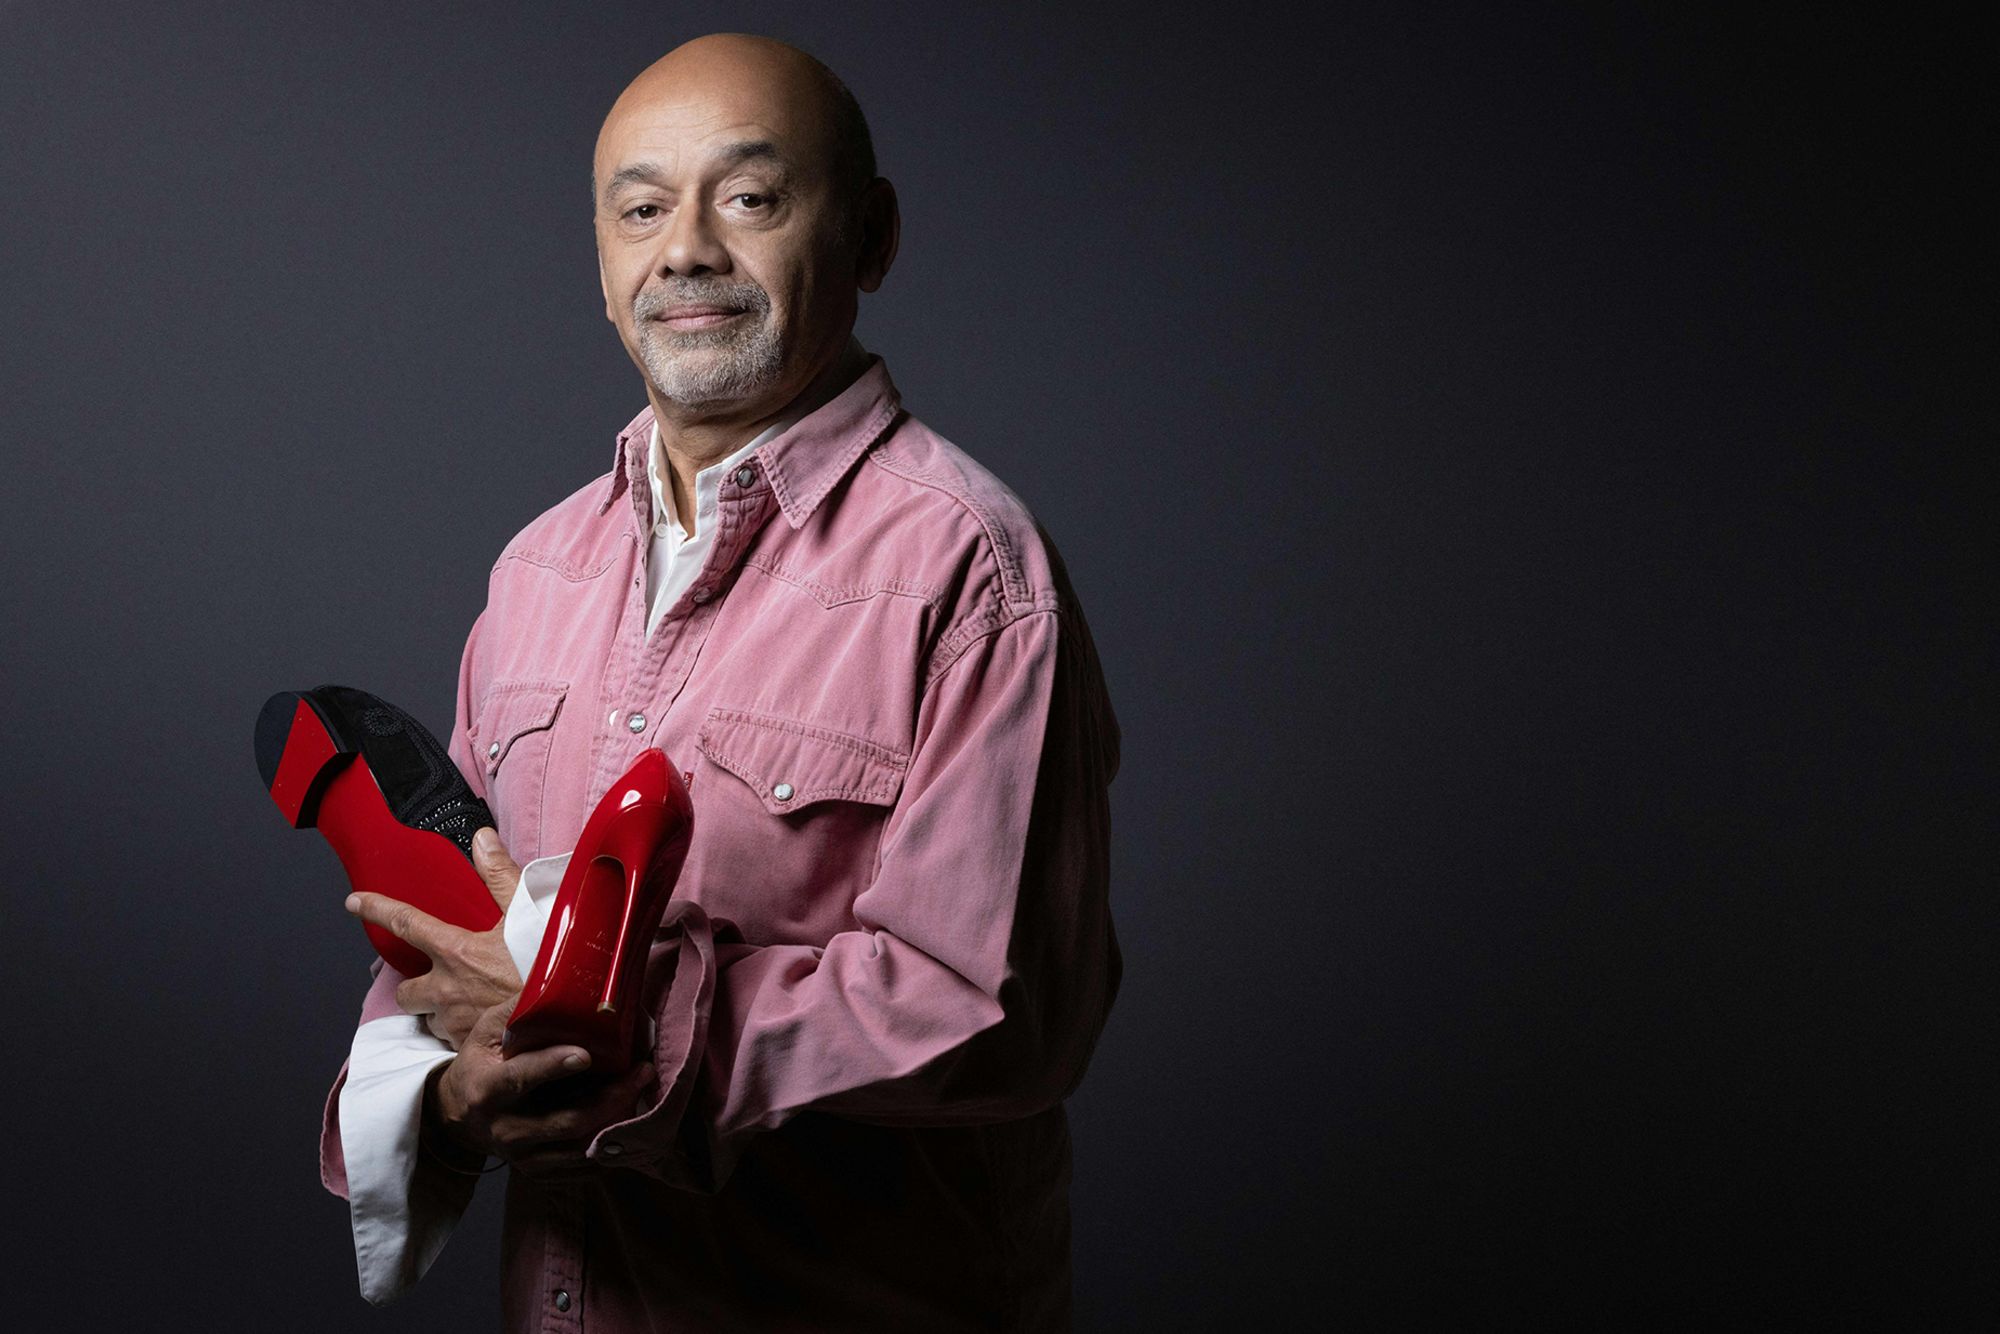 Shoe designer Christian Louboutin is celebrating 30 years of his trademark red soles this year.